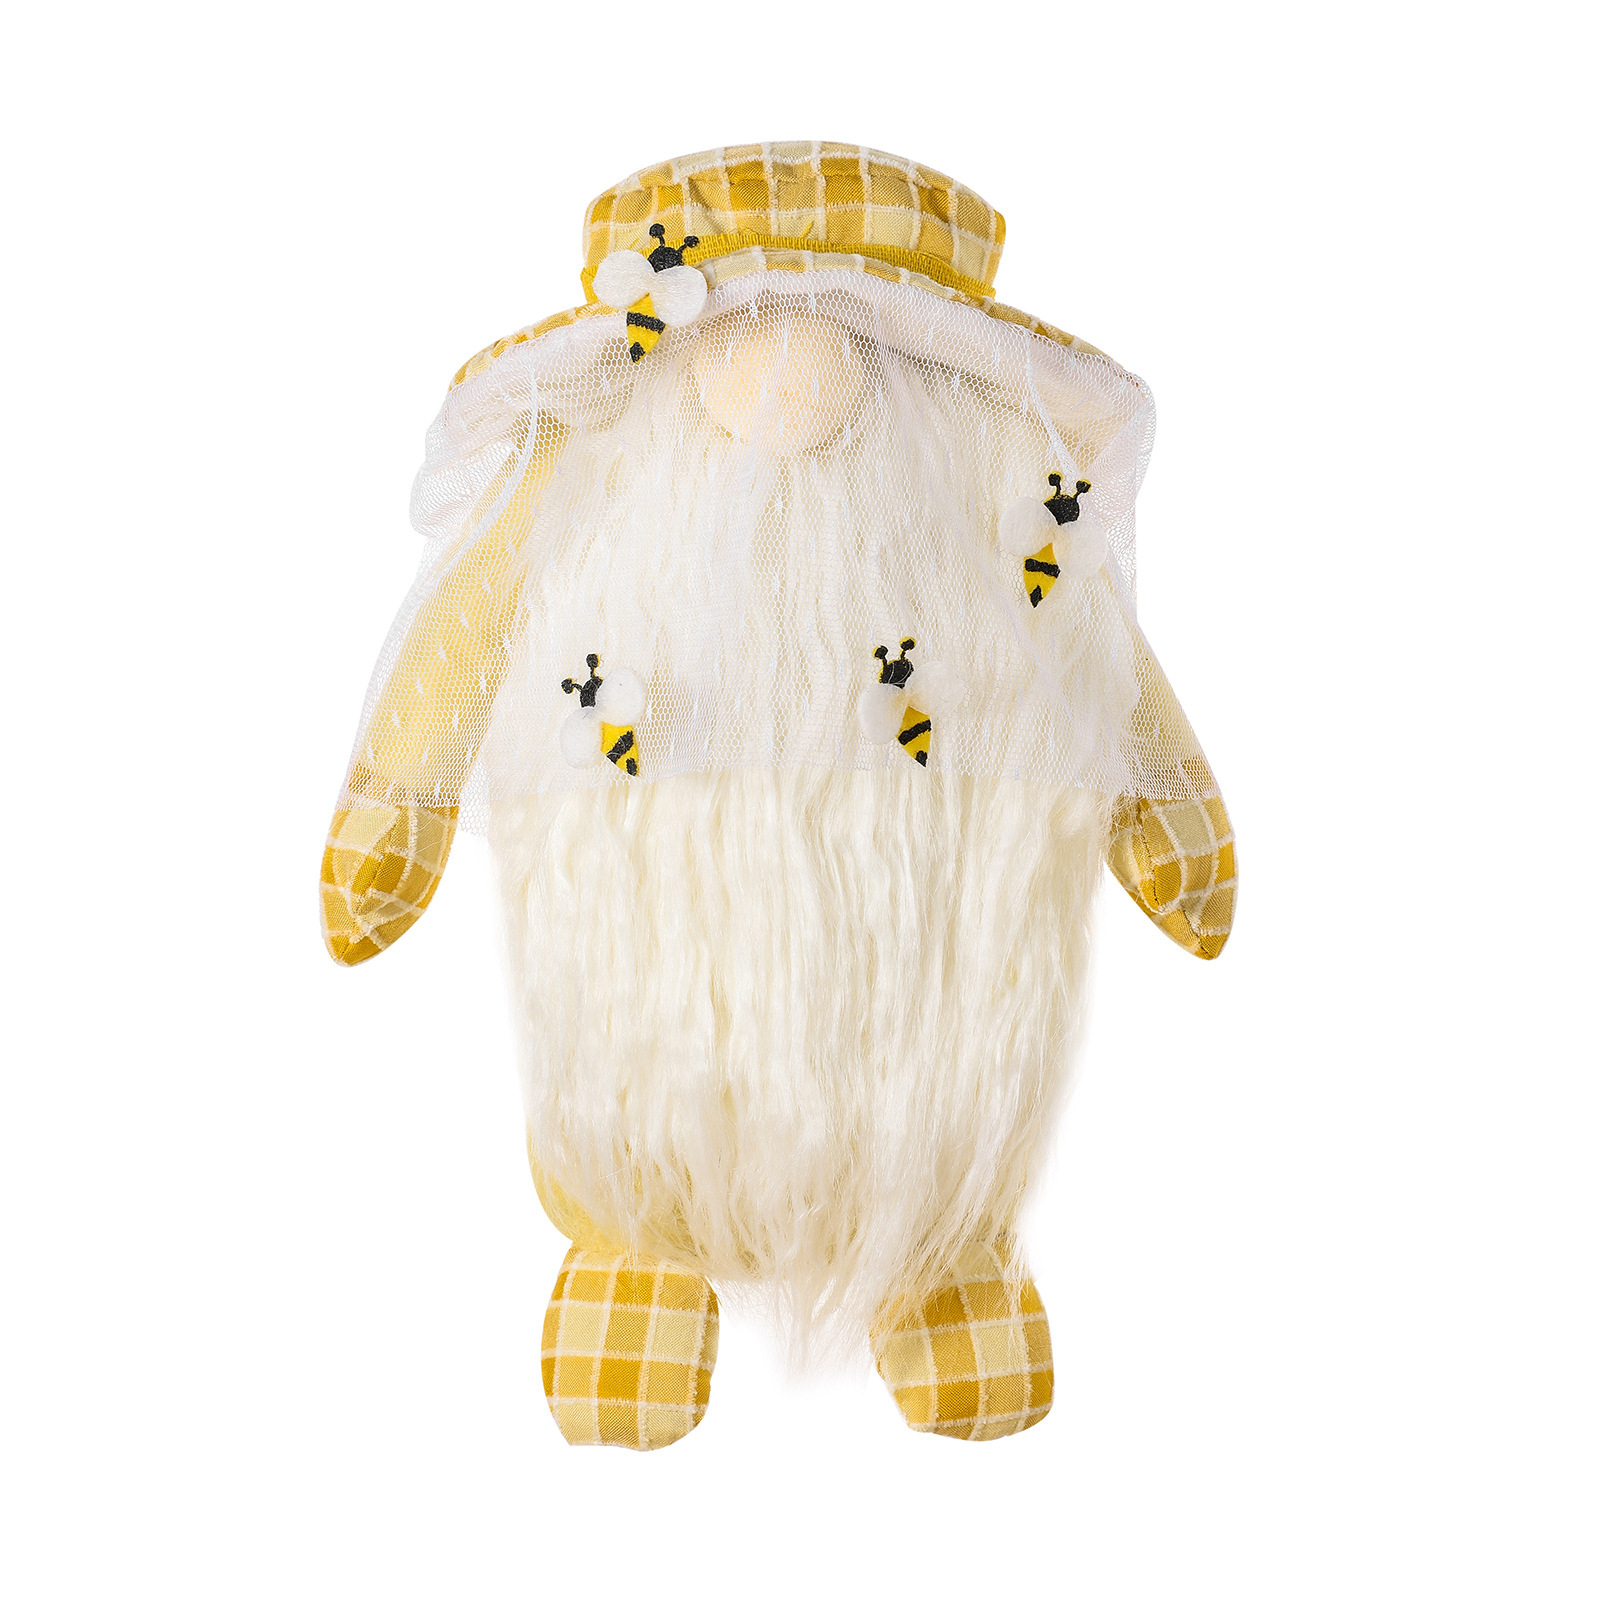 CozyPlushies Charming Bee Faceless Doll Ornament for Home Decor - Perfect Gift